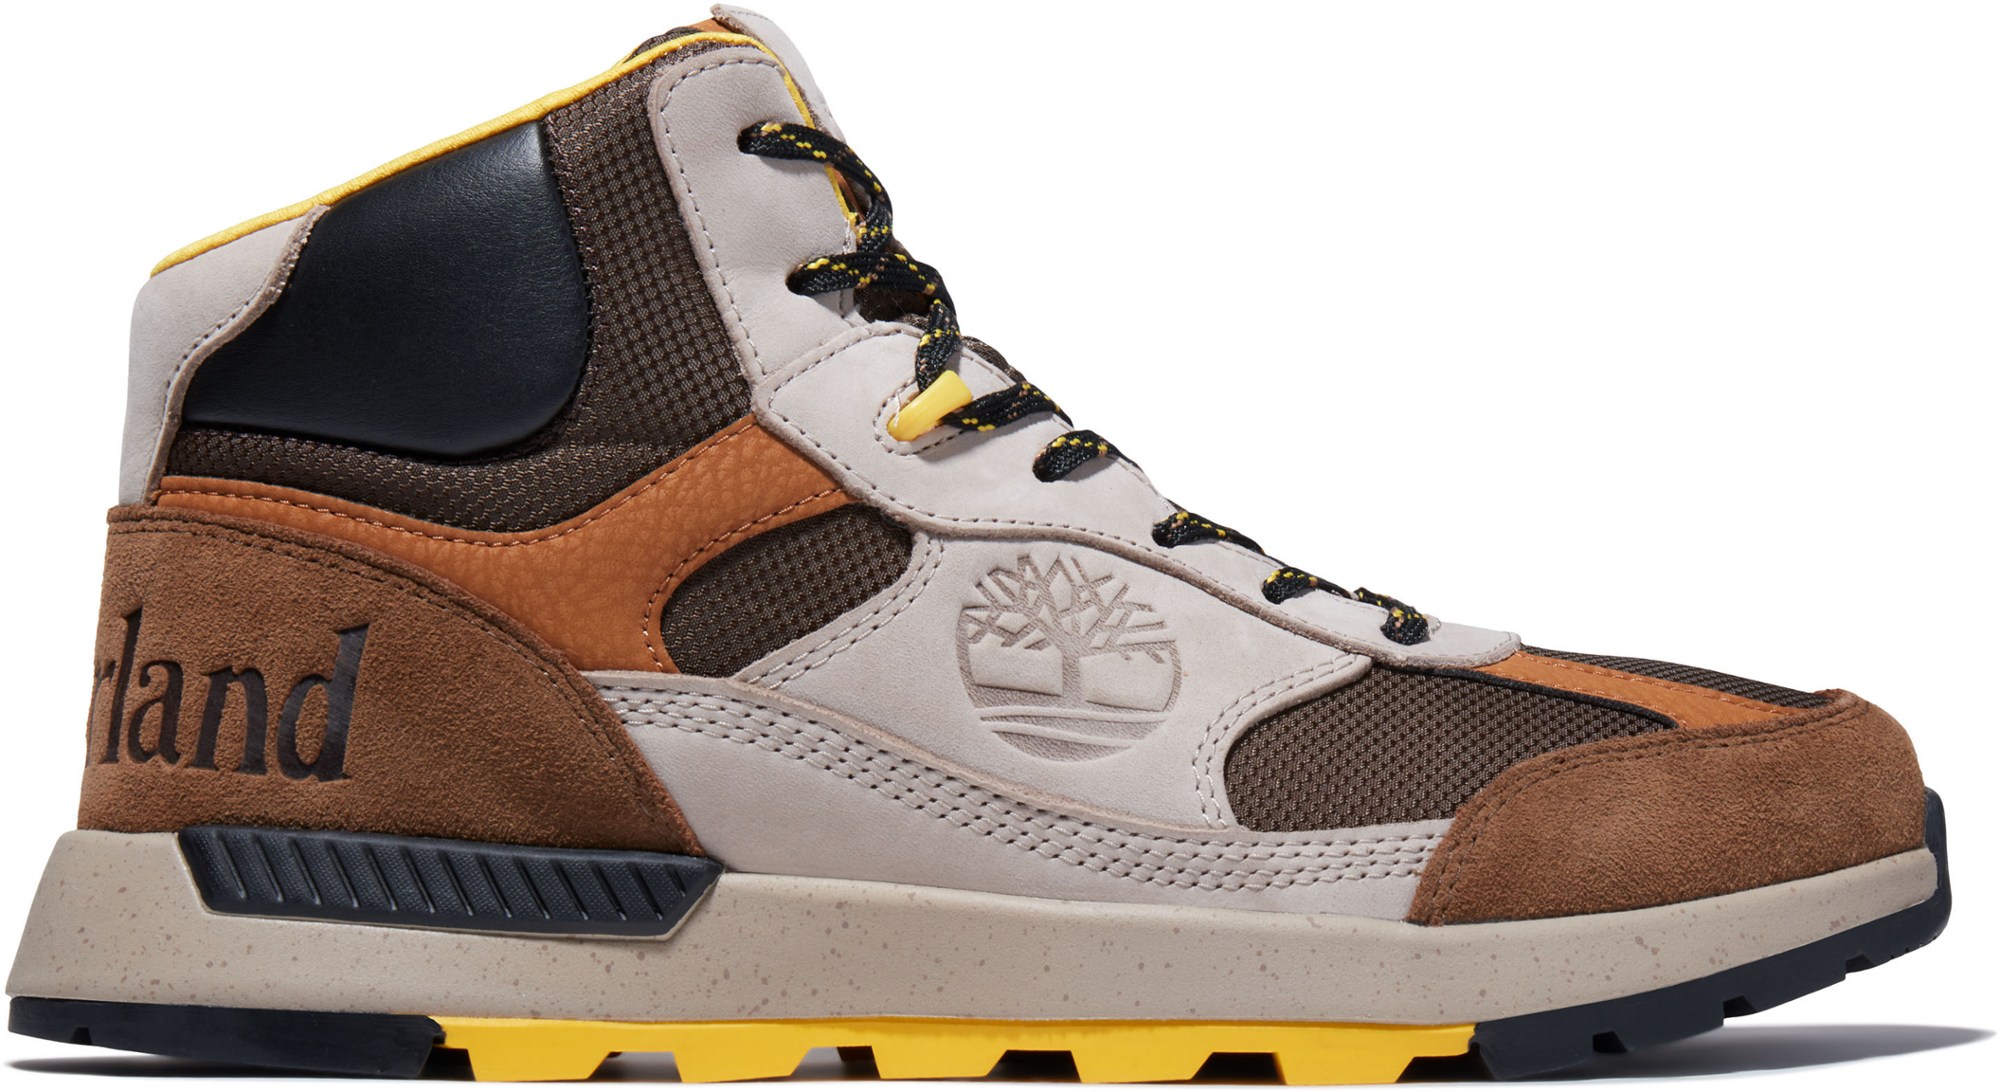 This Timberland Hiking Deal Cuts 18% Off the Price - The Manual